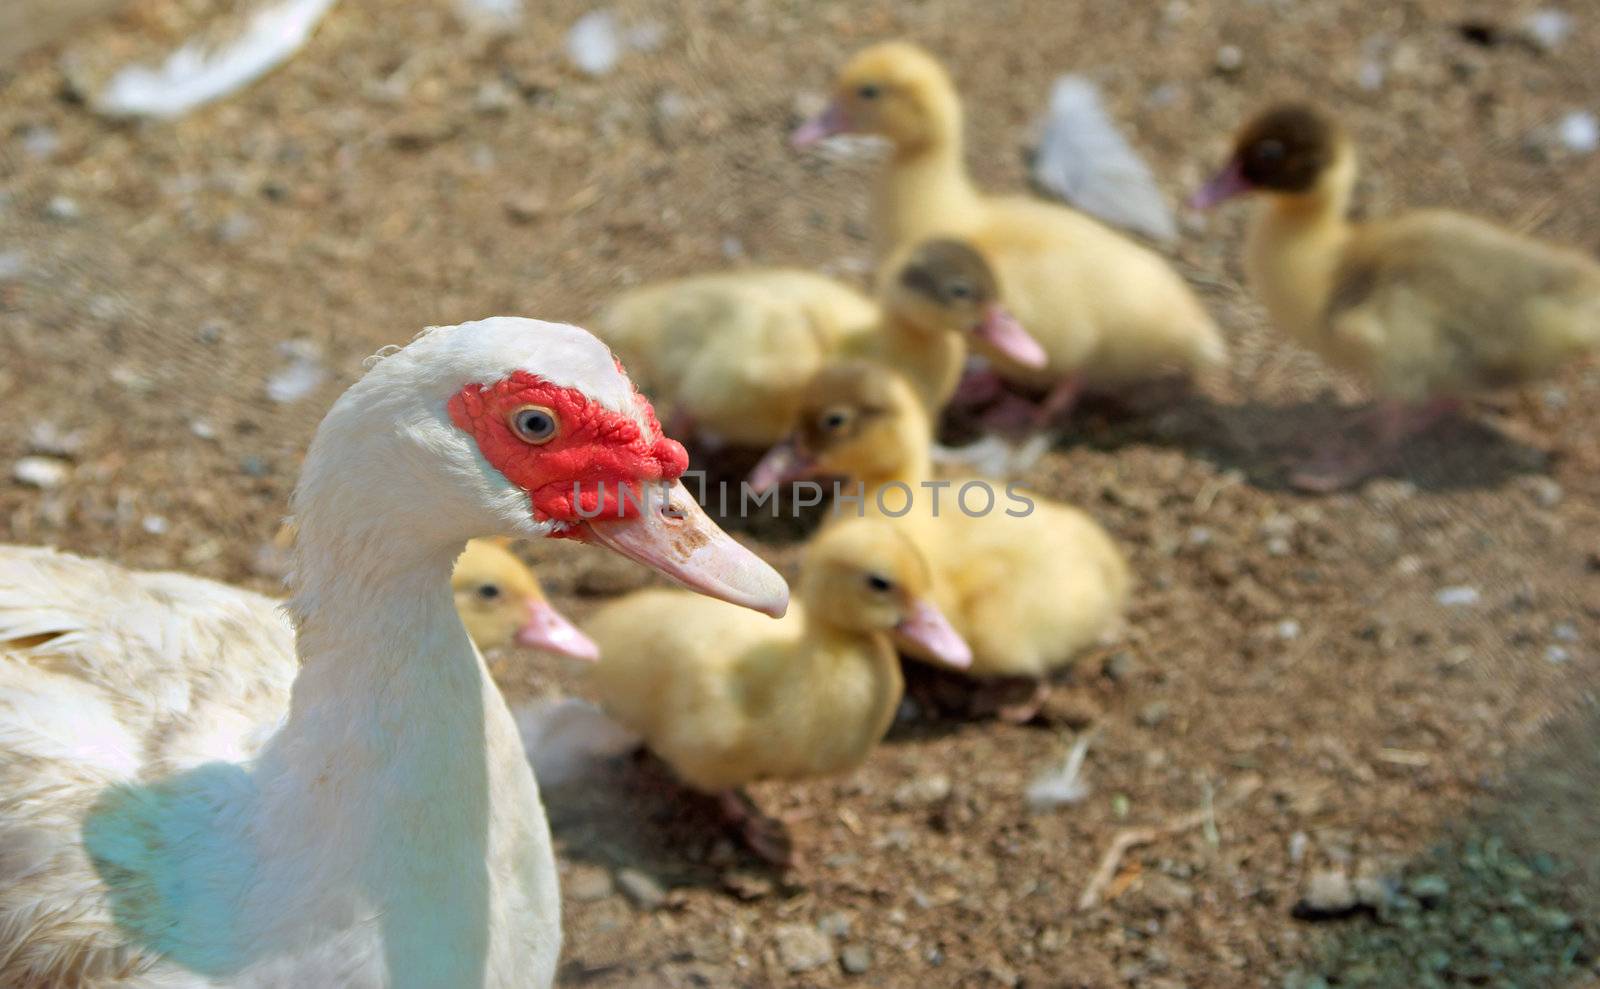 a mother duck watches and guards her little ducklings